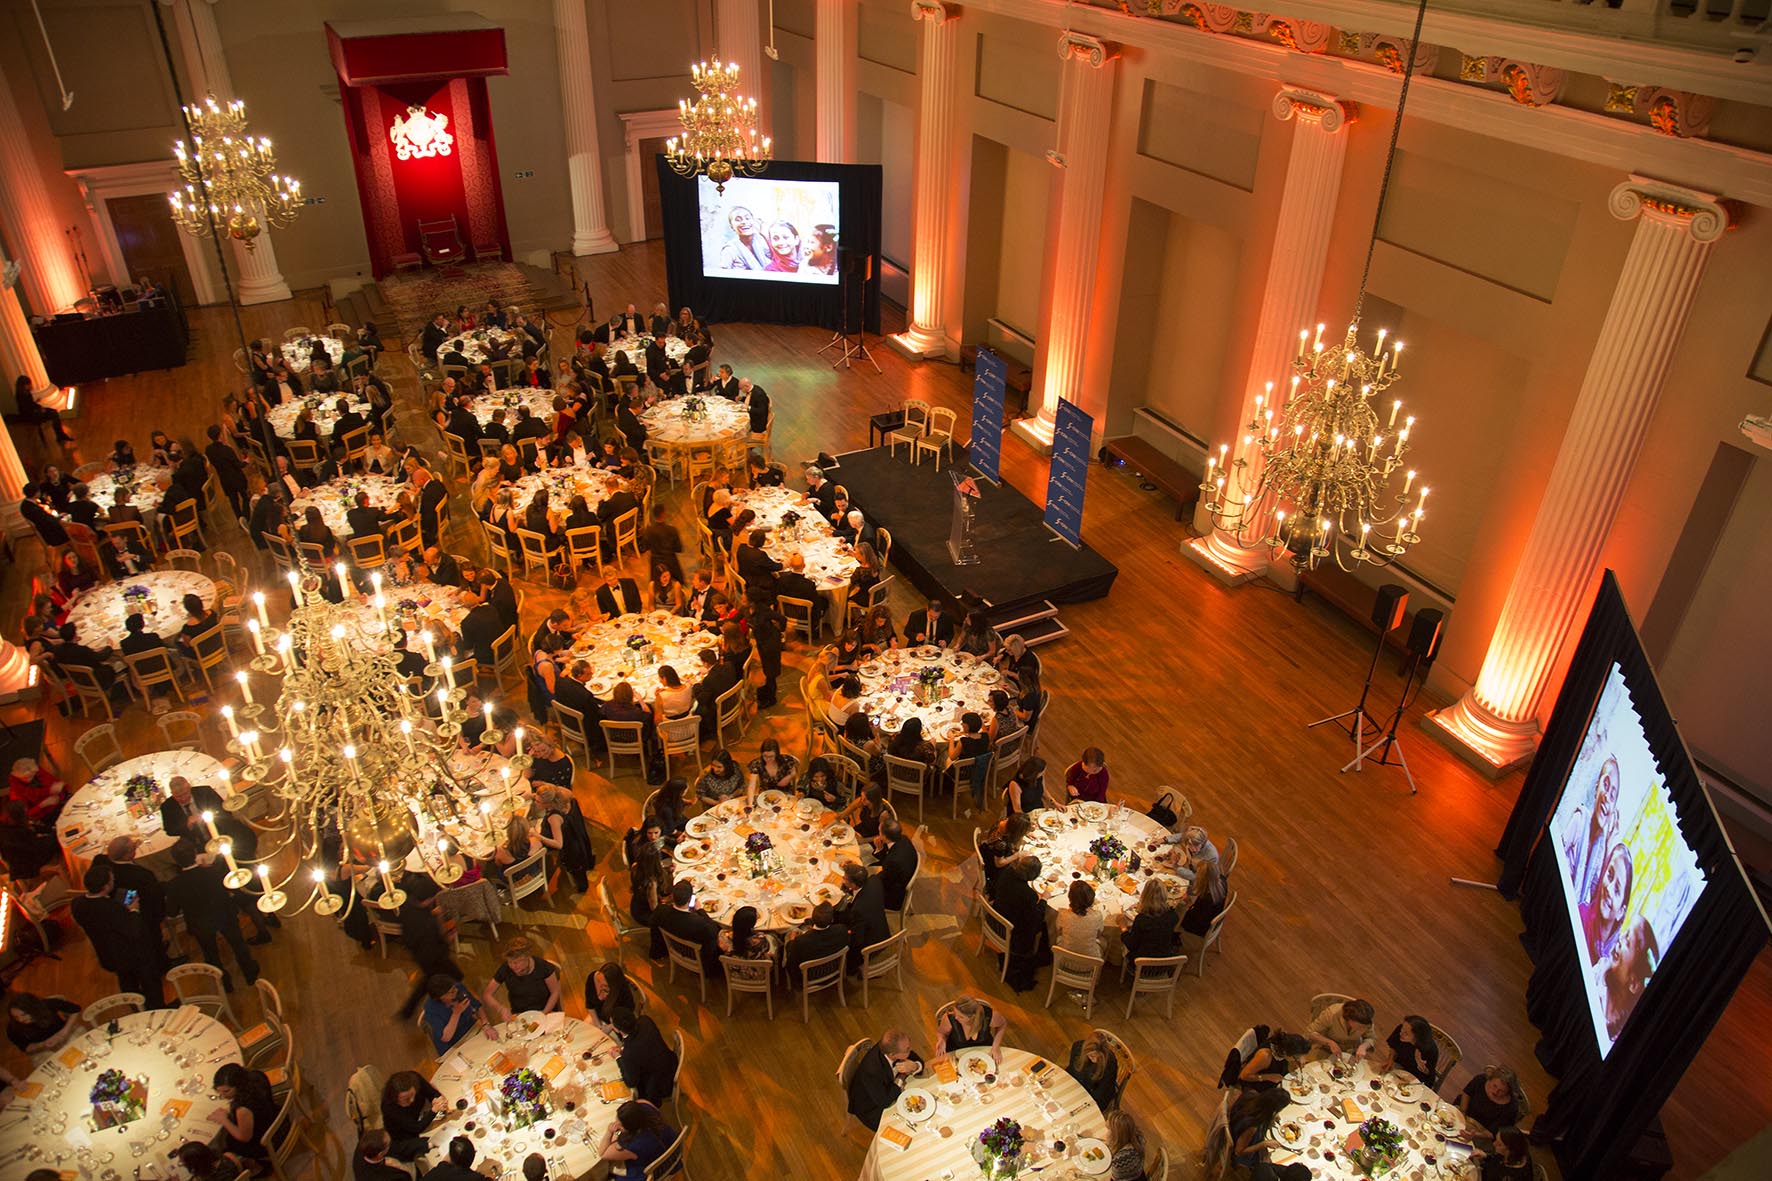  Champions for Change Awards Dinner at Banqueting House.  For the International Centre for Research on Women.  